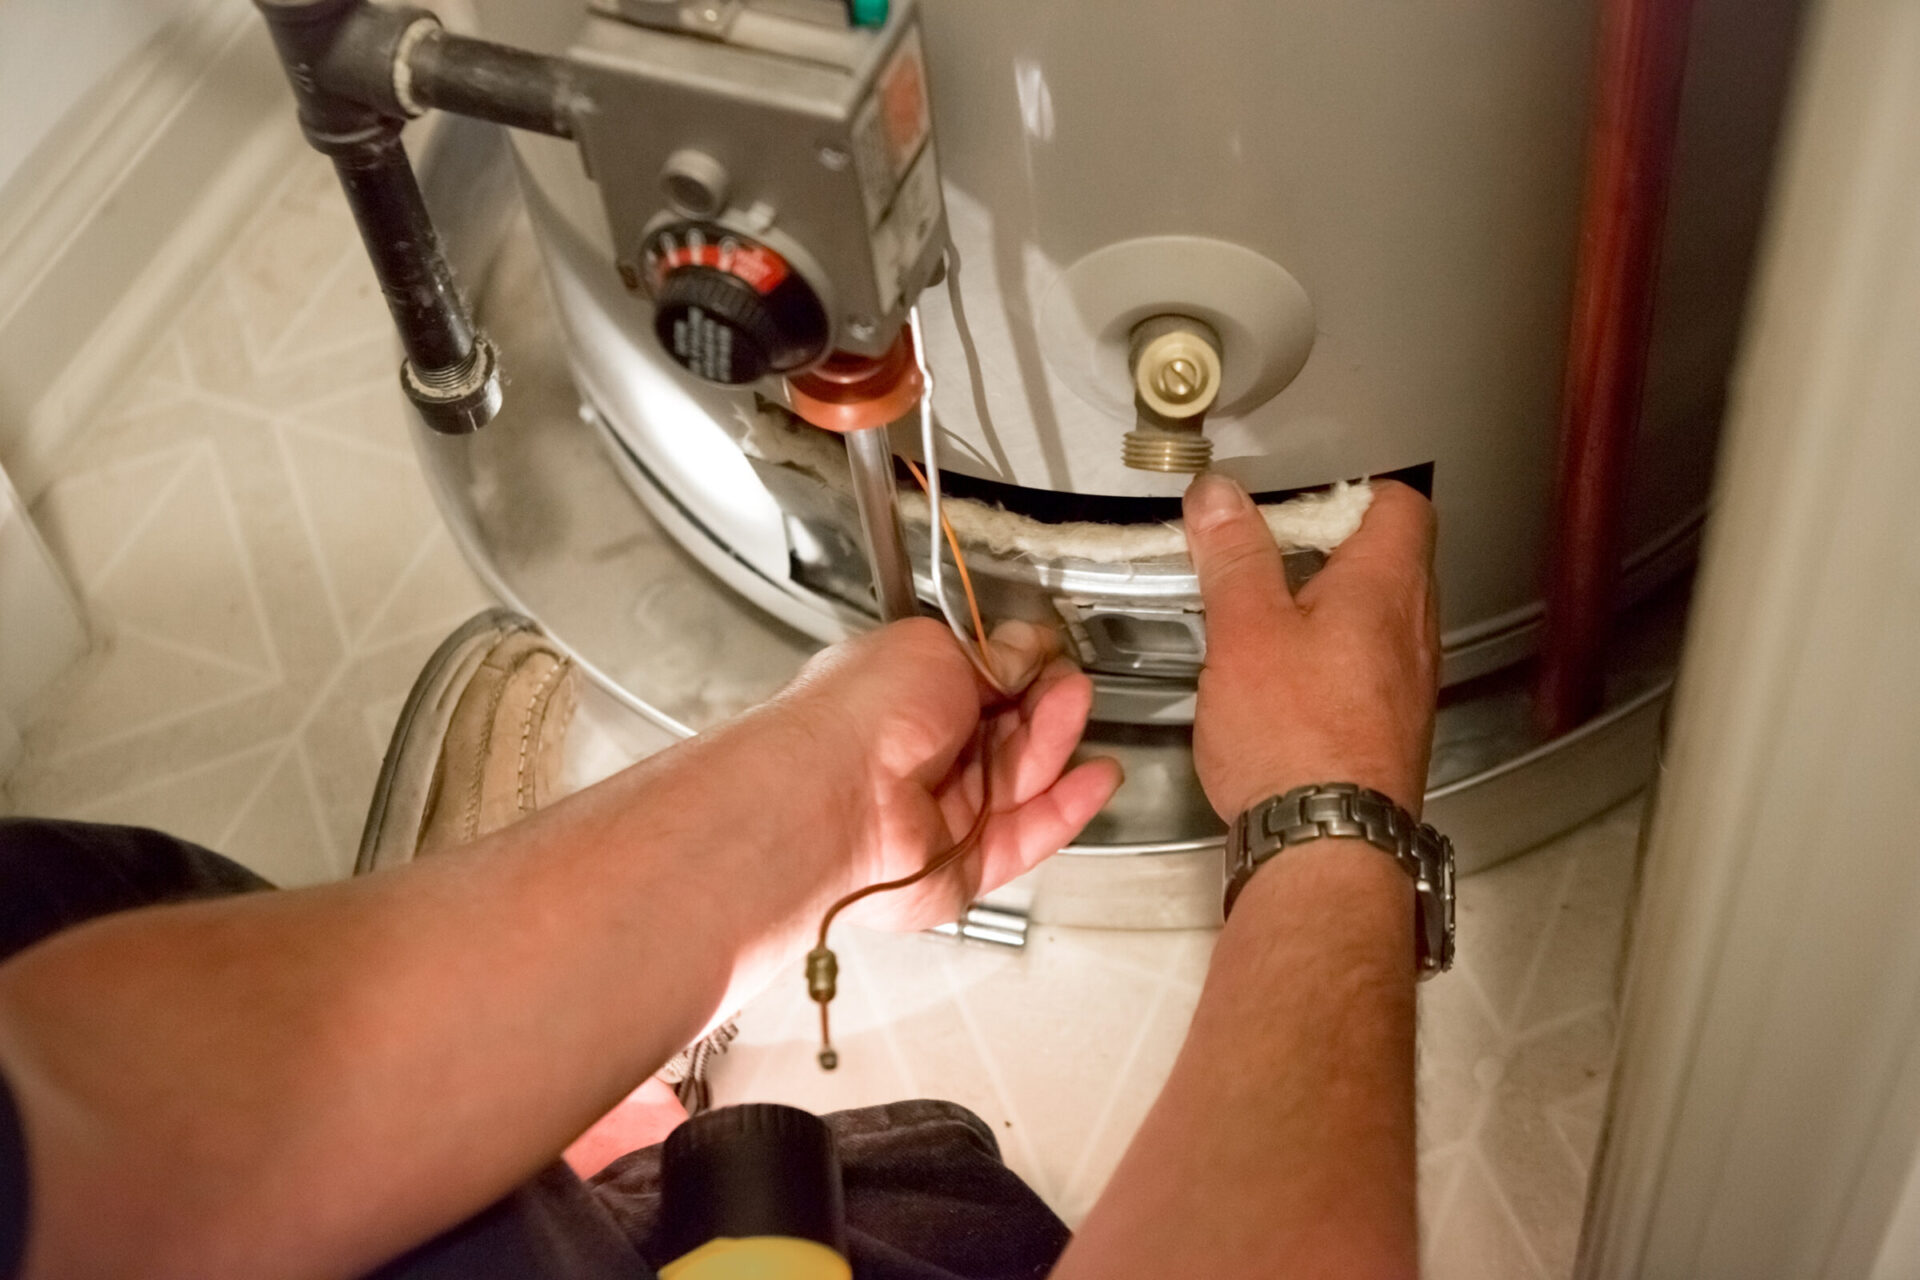 A person is servicing a water heater, adjusting components with tools. Focus on hands, wearing a watch, casual shoes visible by the unit.